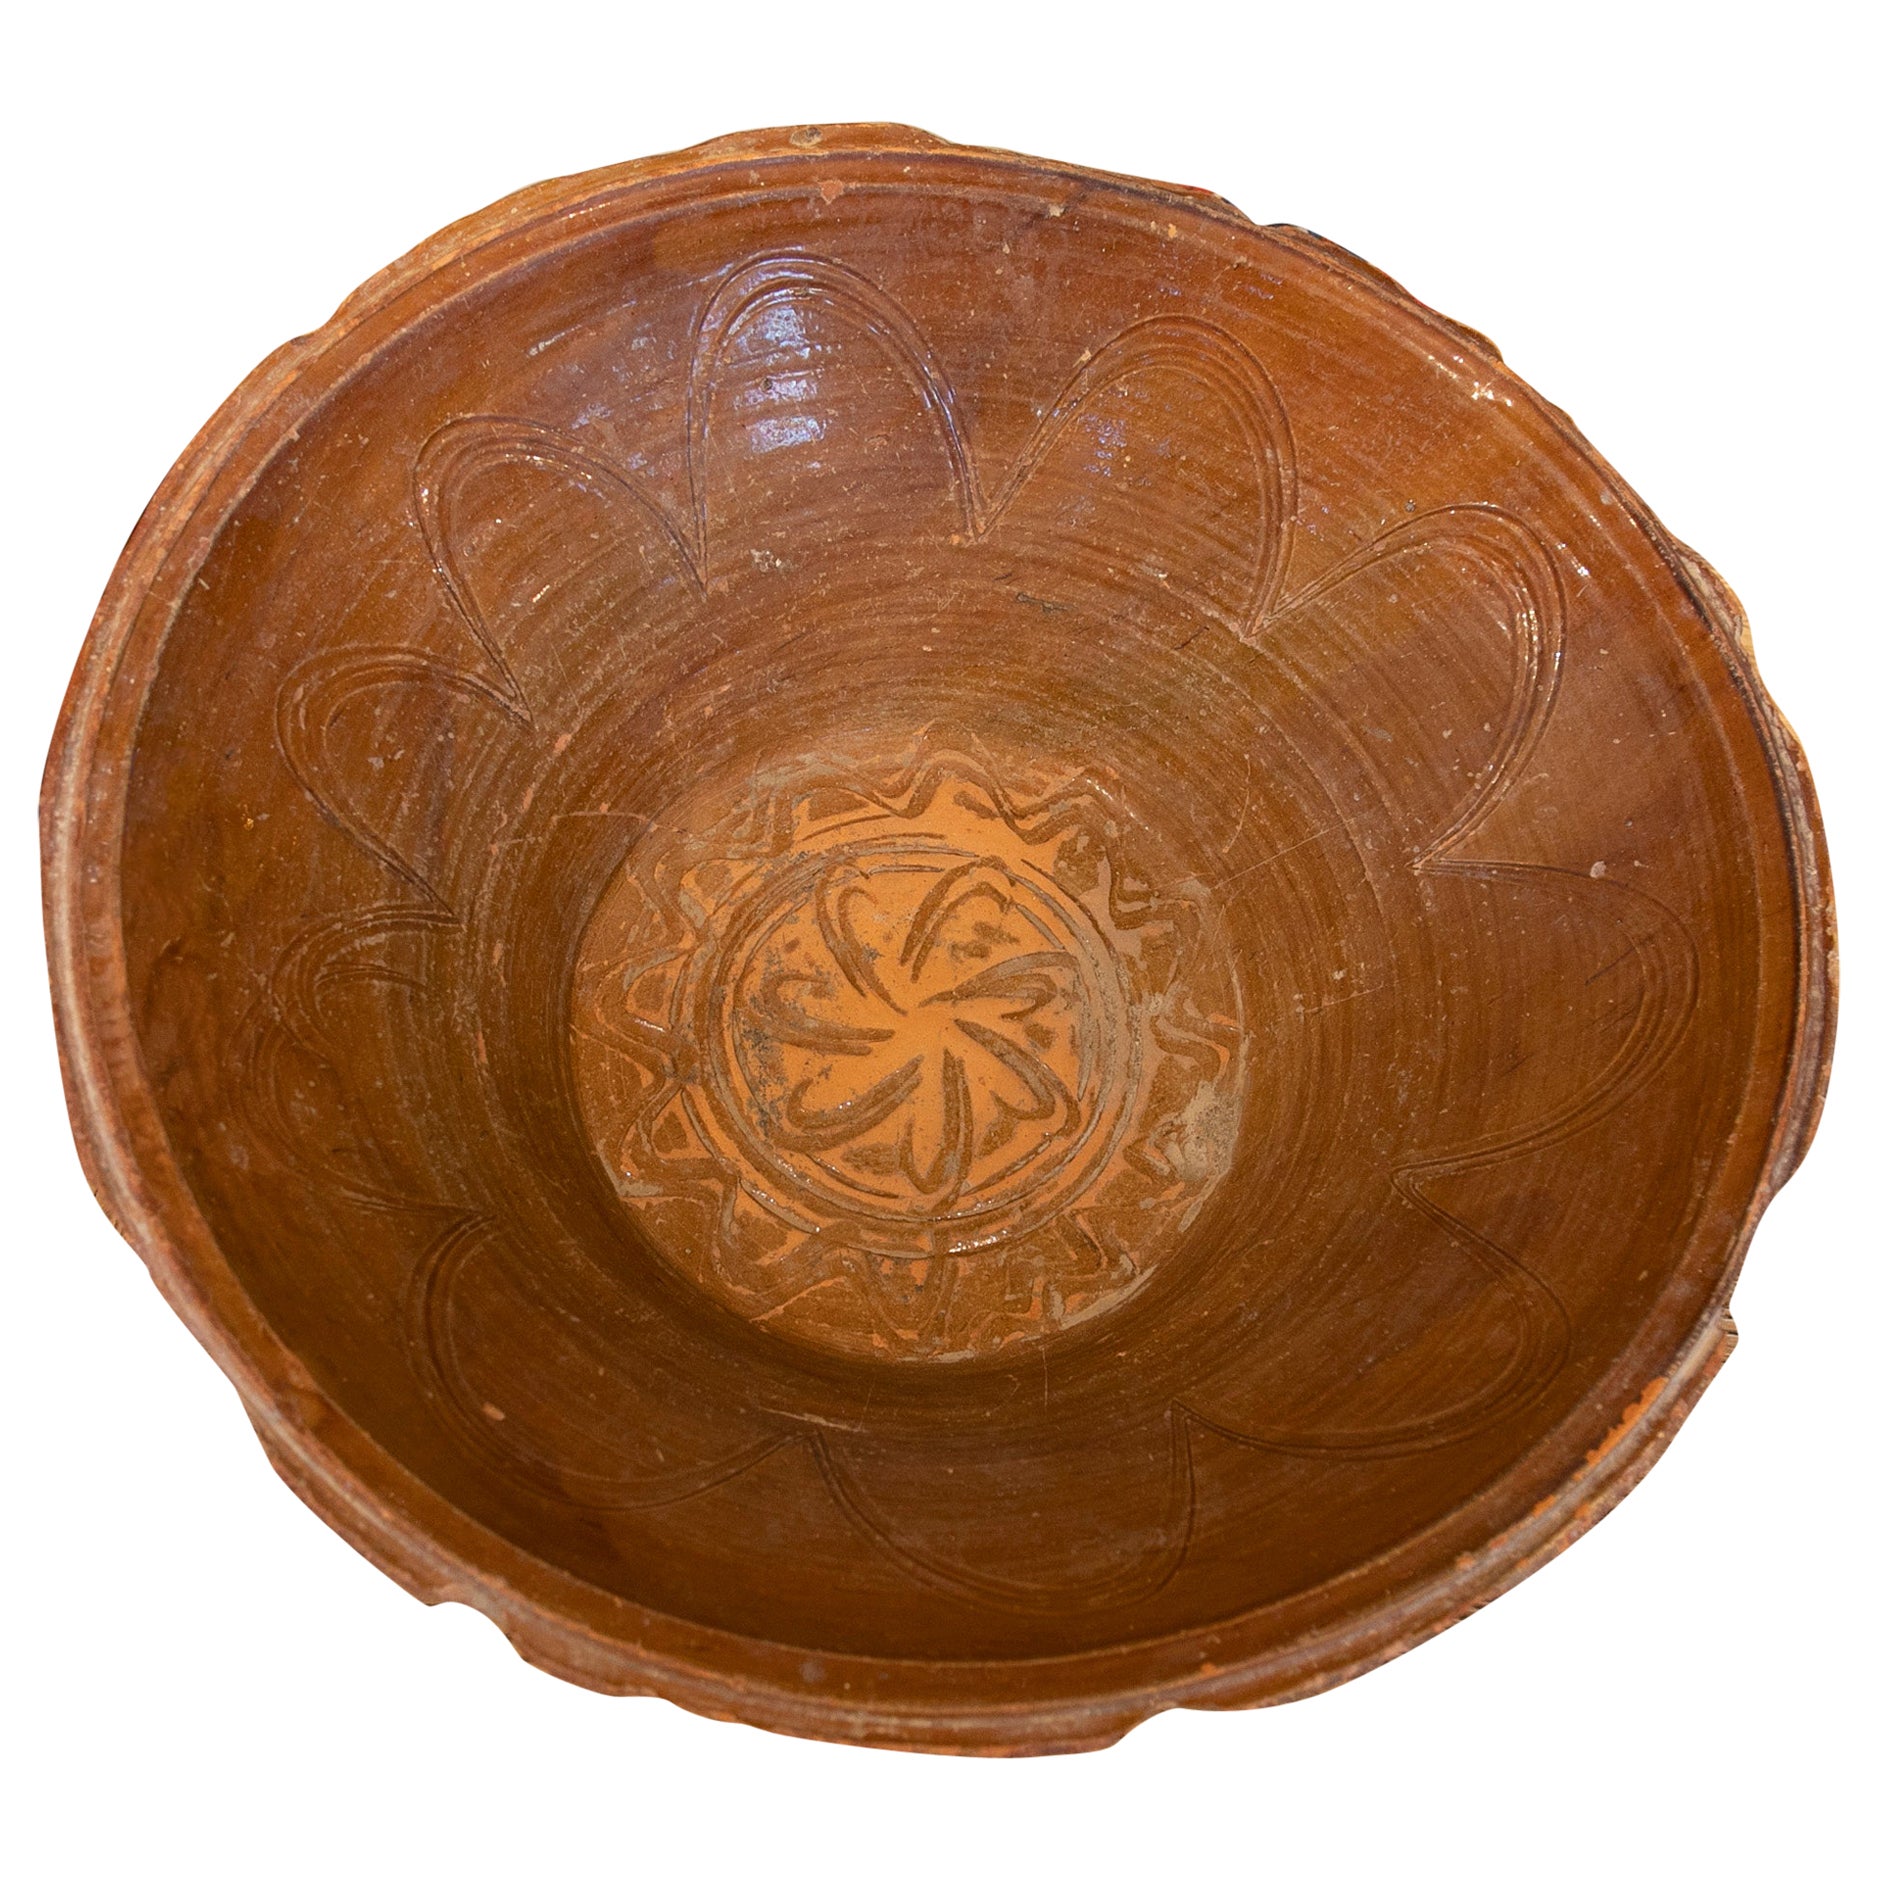 Spanish Small Basin of Glazed Ceramic in Brown Decorated in the Central Part